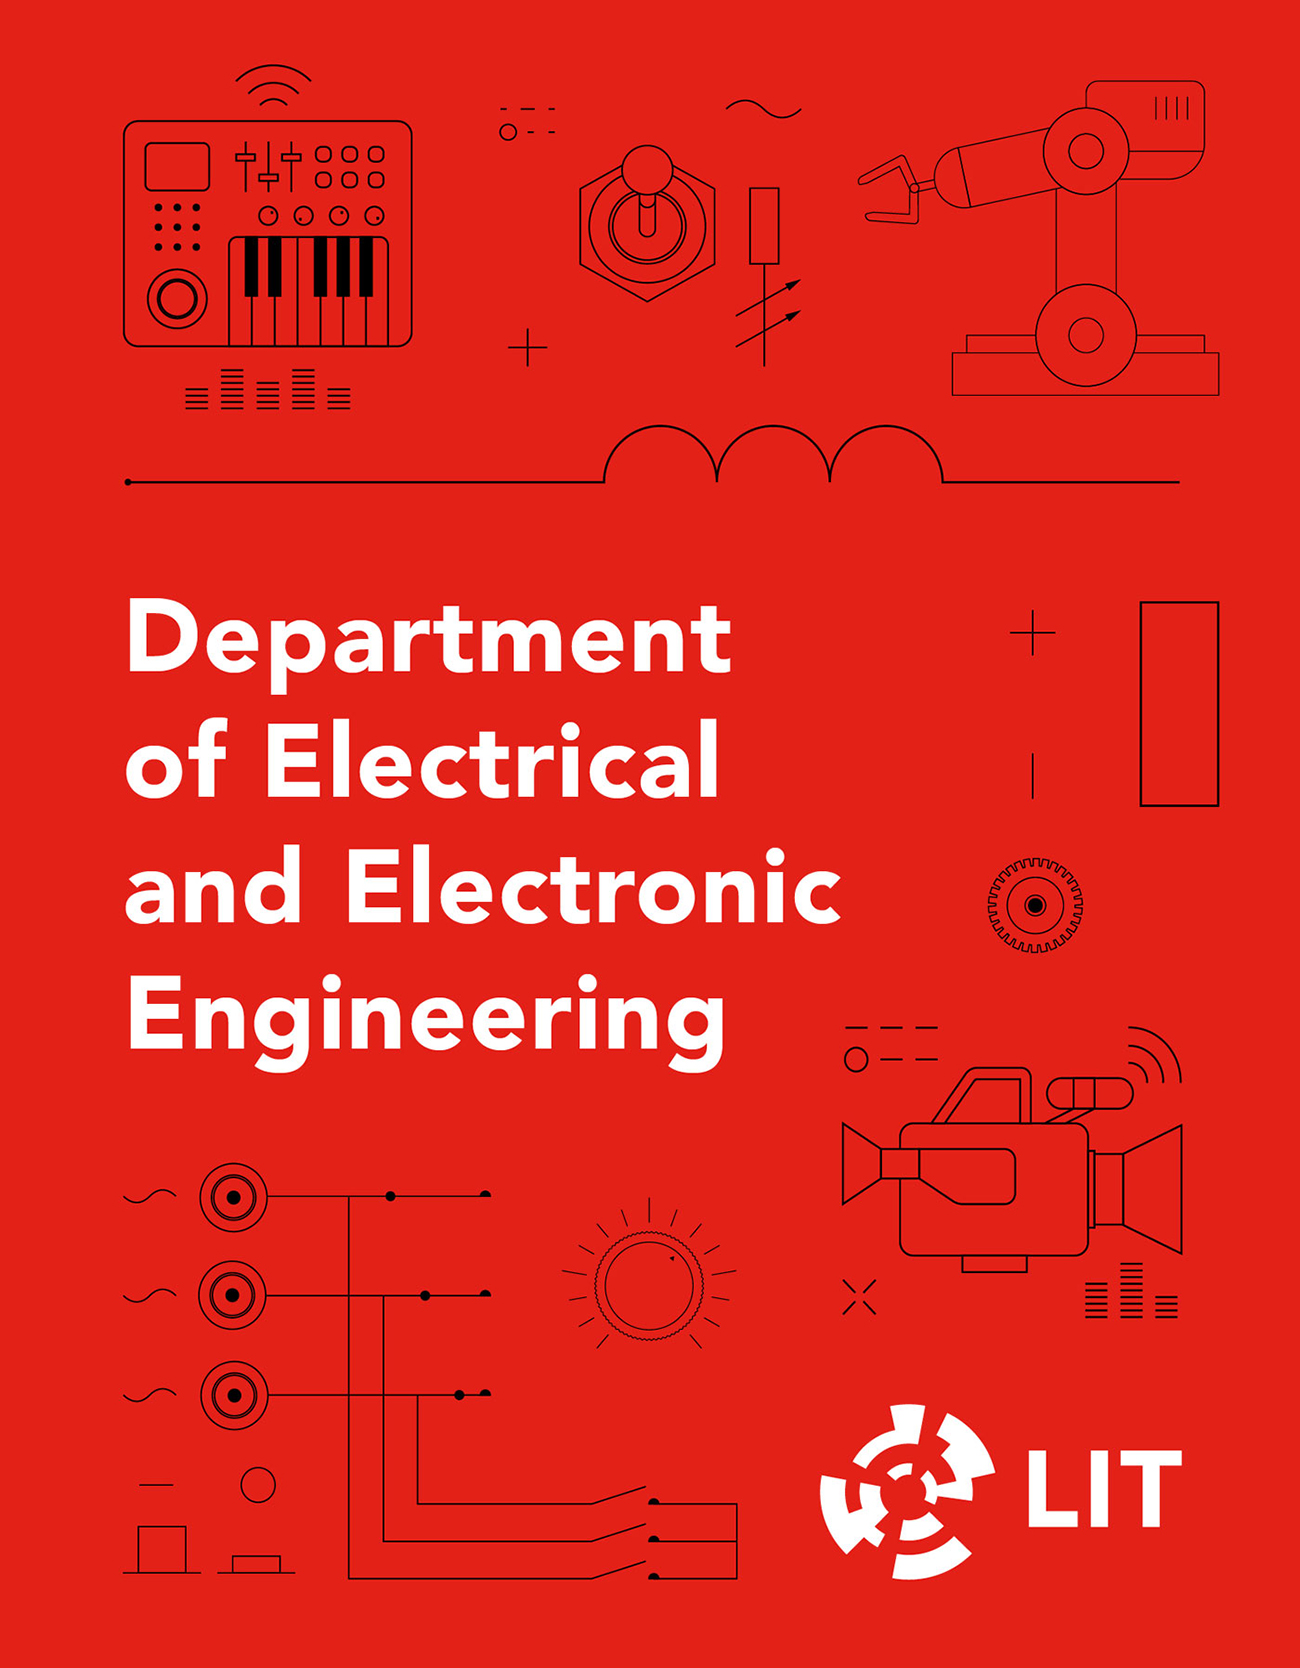 LIT Electrical and Electronic Engineering Iconography